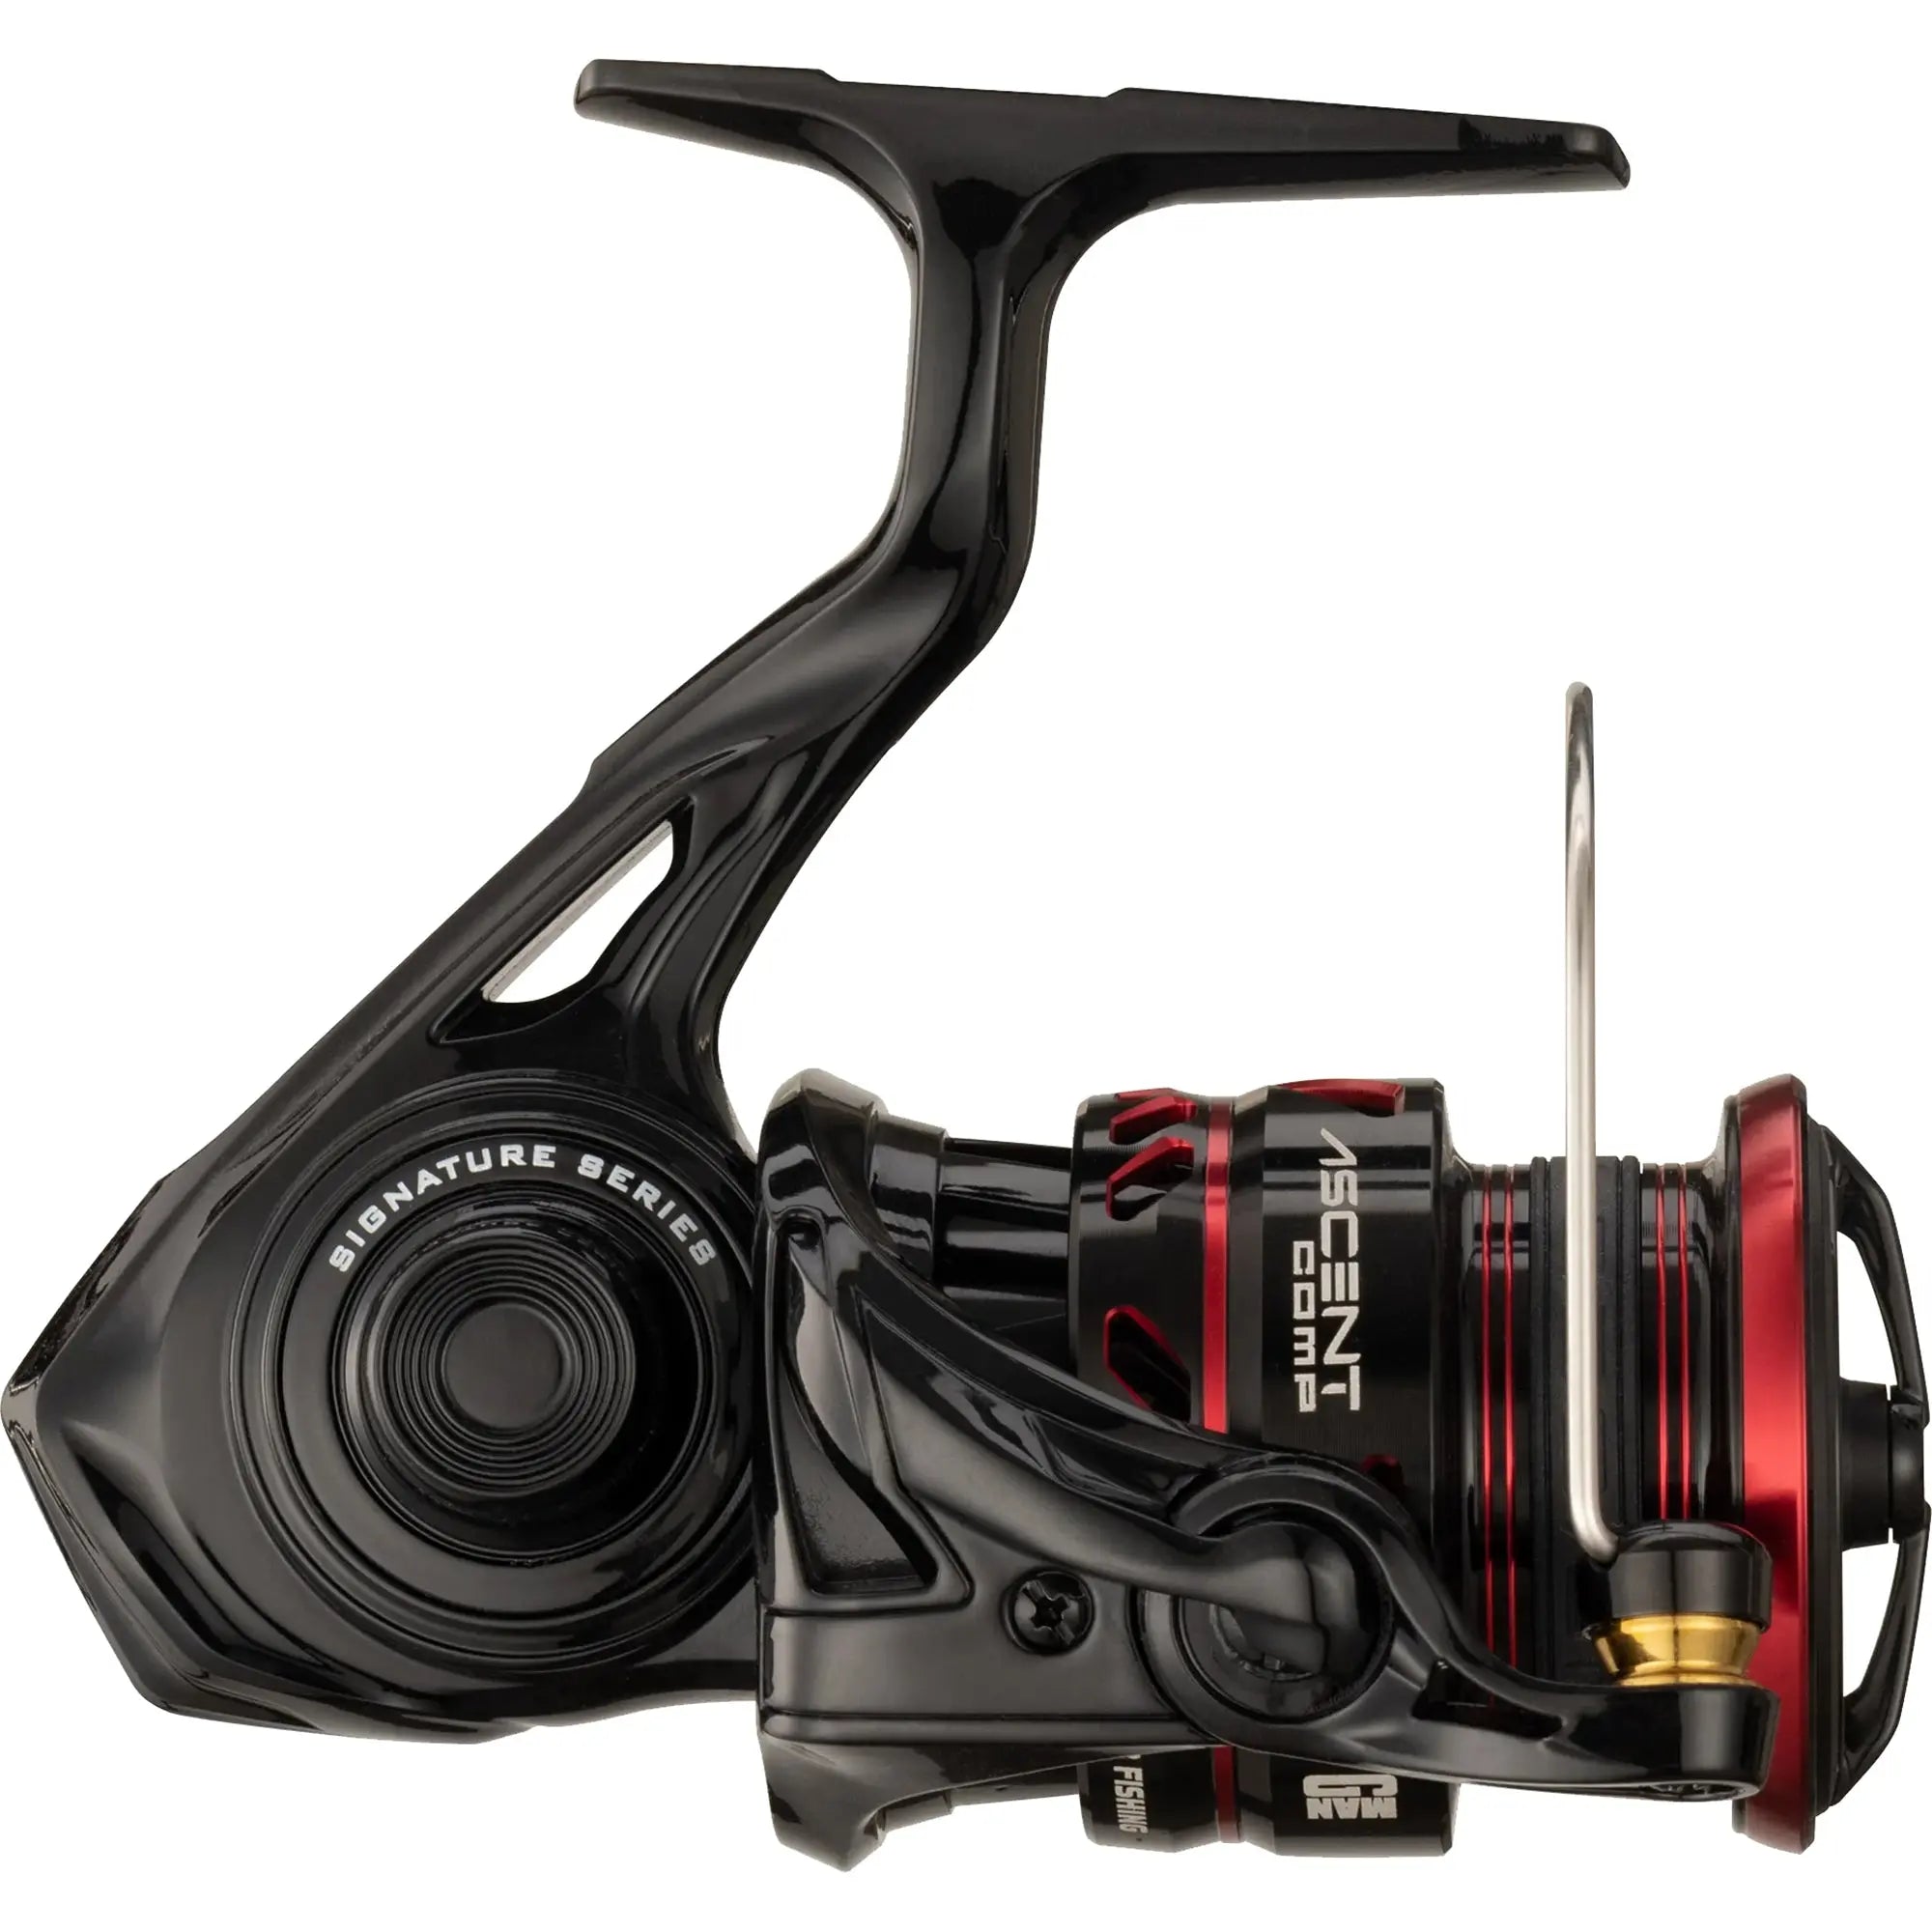 13 Fishing Ascent Competition G-Man Spinning Fishing Reel 13 Fishing